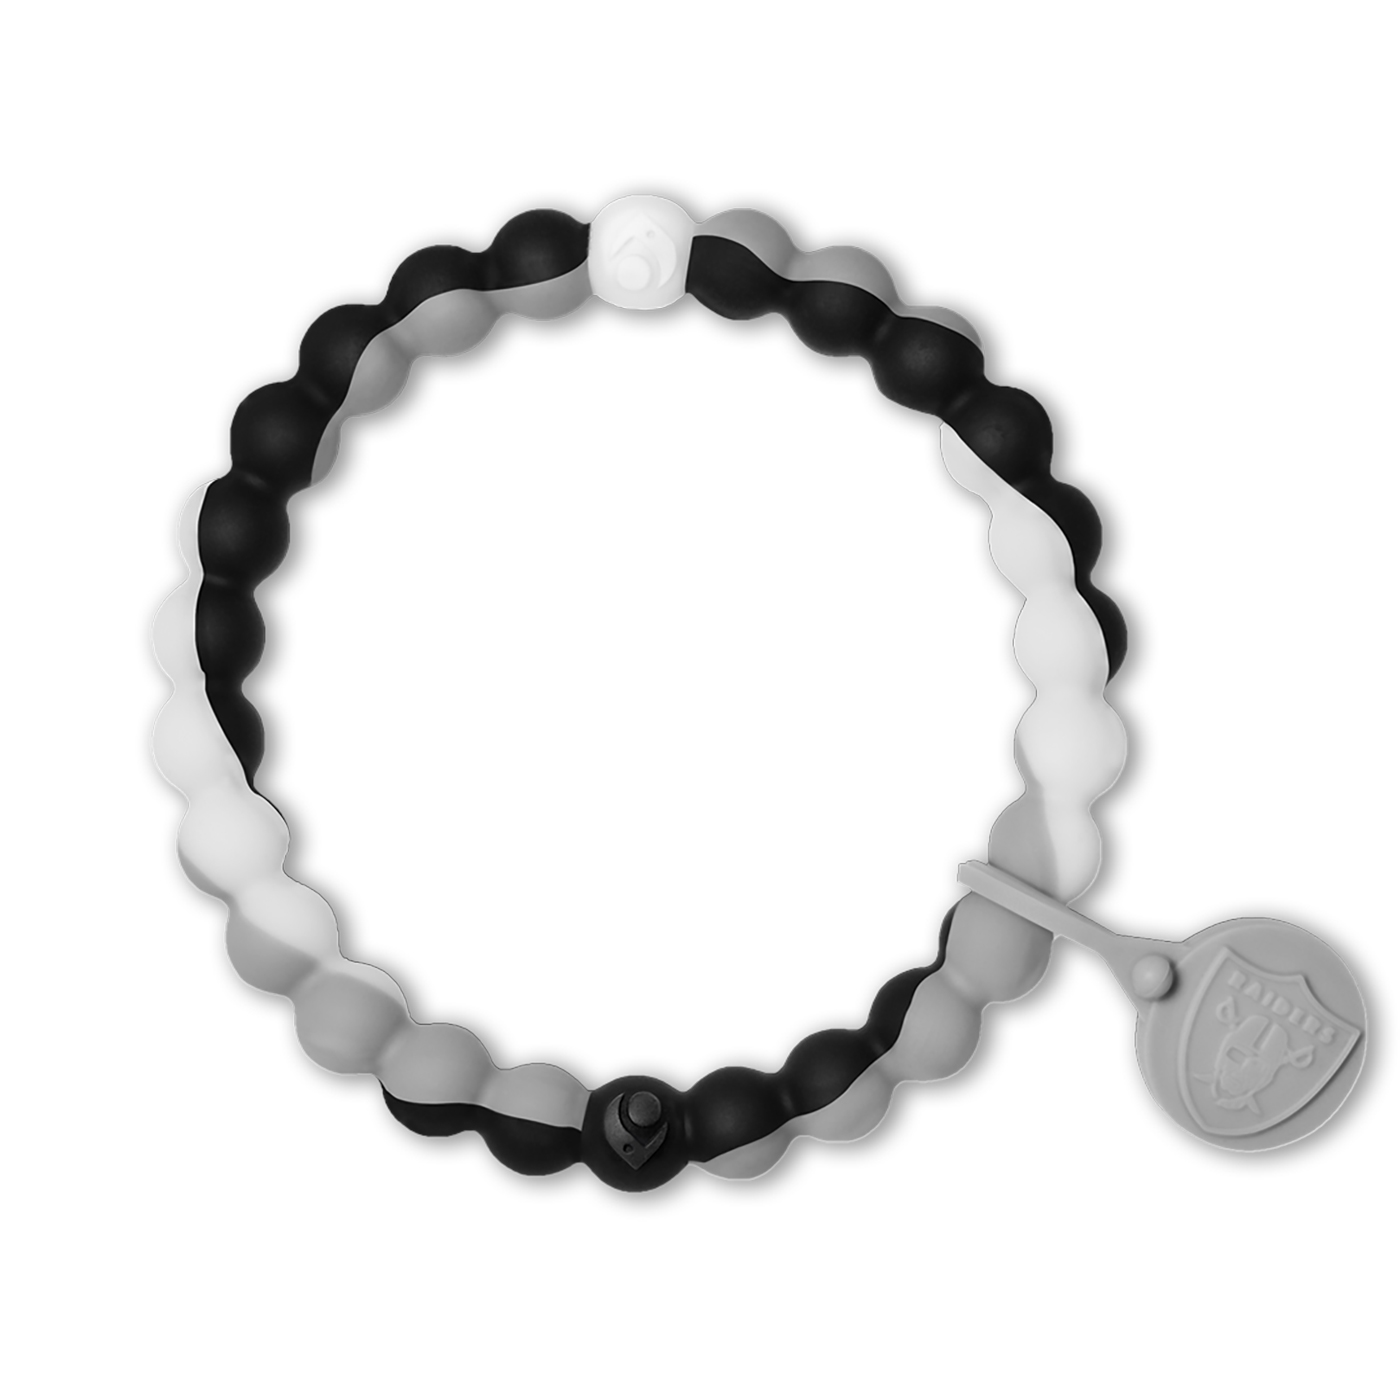 Limited Edition NEON Lokai Bracelet – Silver Accents